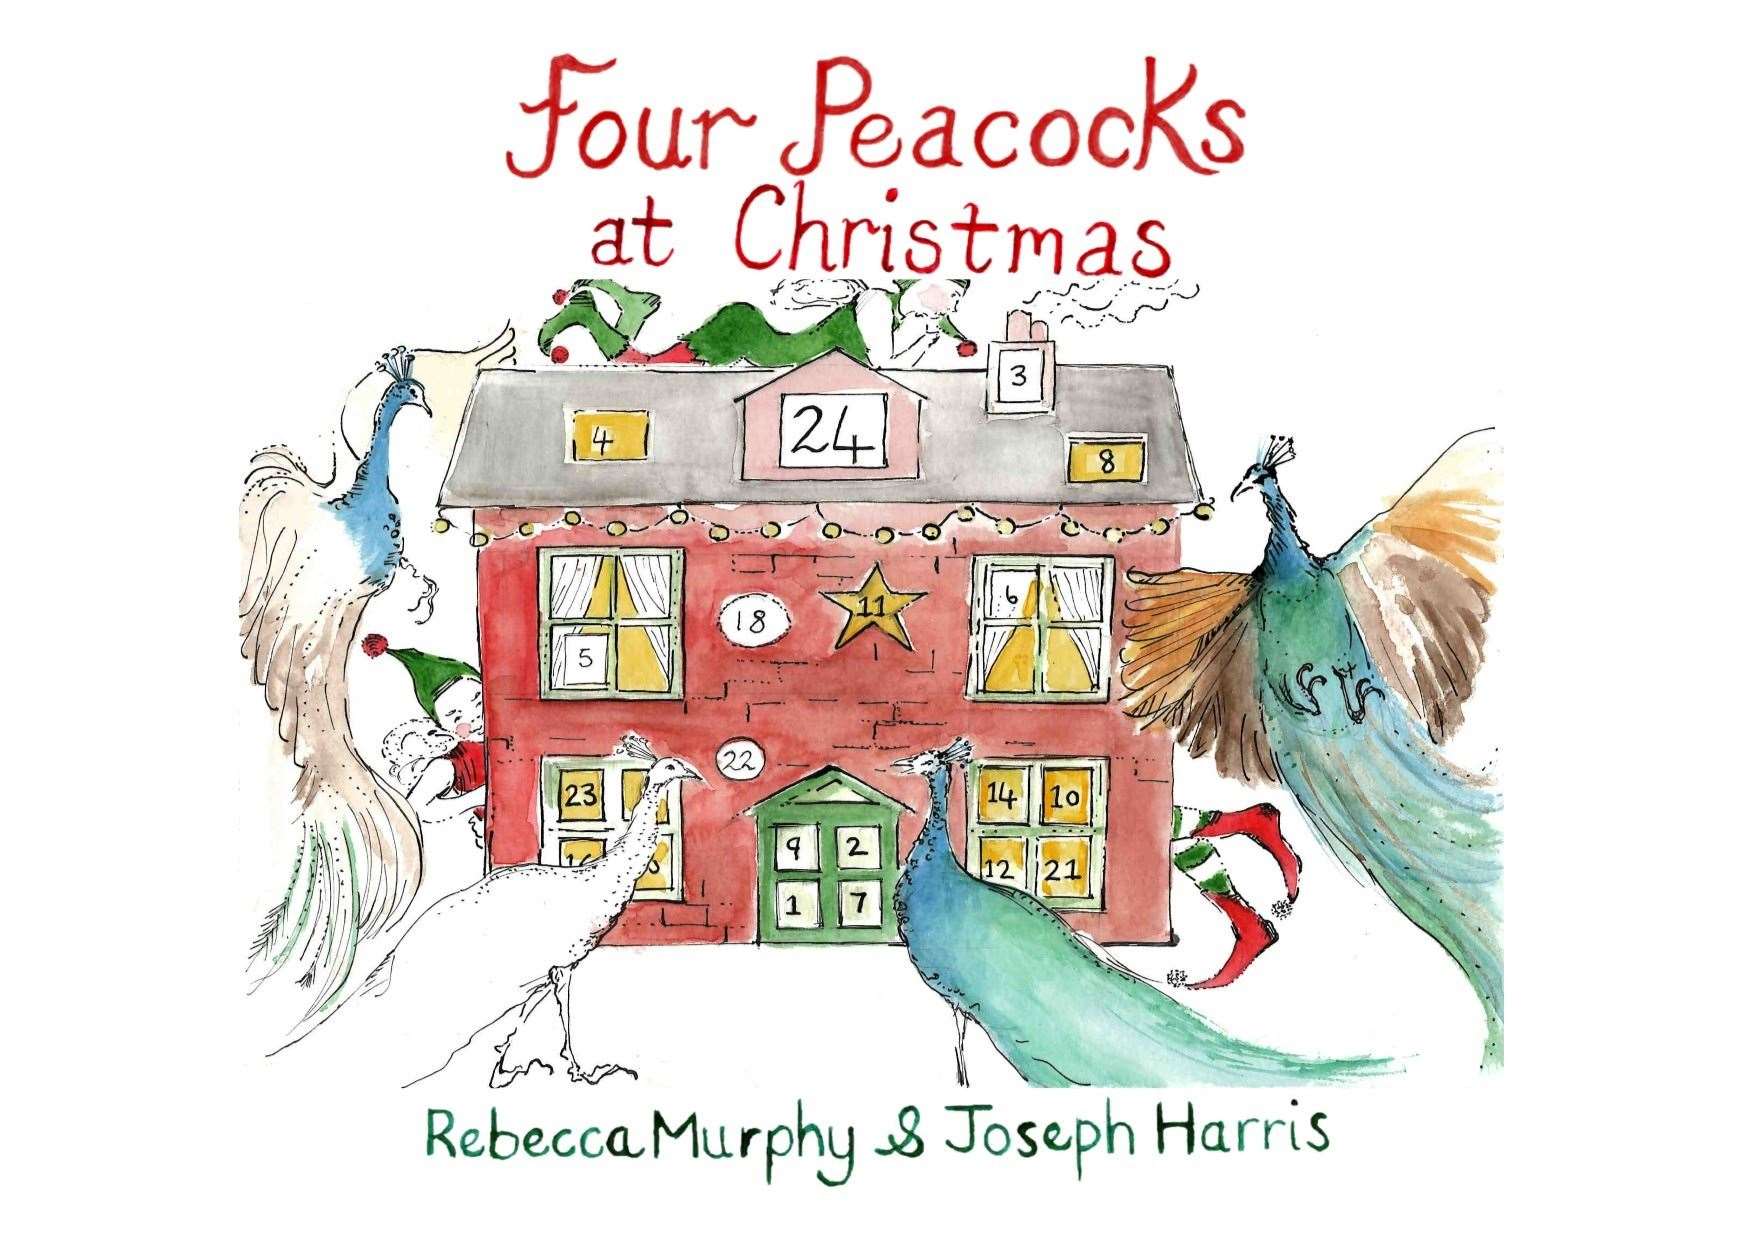 Four Peacocks at Christmas is the second children’s book by Rebecca Murphy and Joseph Harris